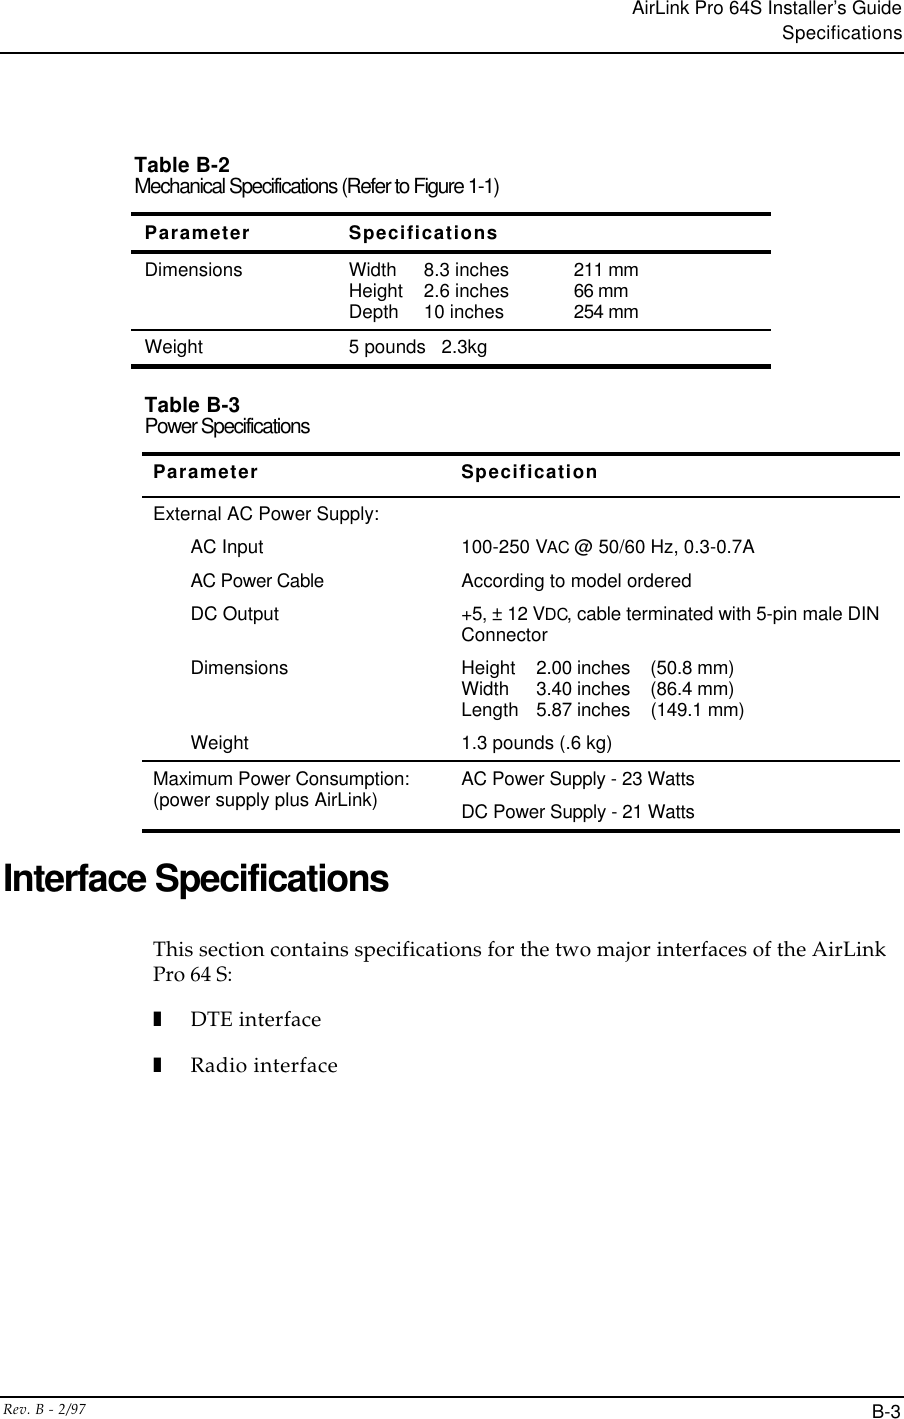 AirLink Pro 64S Installer’s GuideSpecificationsRev. B - 2/97 B-3Table B-2Mechanical Specifications (Refer to Figure 1-1)Parameter SpecificationsDimensions Width 8.3 inches 211 mmHeight 2.6 inches 66 mmDepth 10 inches 254 mmWeight 5 pounds   2.3kgTable B-3Power SpecificationsParameter SpecificationExternal AC Power Supply:AC InputAC Power CableDC OutputDimensionsWeight100-250 VAC @ 50/60 Hz, 0.3-0.7AAccording to model ordered+5, ± 12 VDC, cable terminated with 5-pin male DINConnectorHeight 2.00 inches    (50.8 mm)Width 3.40 inches    (86.4 mm)Length 5.87 inches    (149.1 mm)1.3 pounds (.6 kg)Maximum Power Consumption:(power supply plus AirLink) AC Power Supply - 23 WattsDC Power Supply - 21 WattsInterface SpecificationsThis section contains specifications for the two major interfaces of the AirLinkPro 64 S:❚DTE interface❚Radio interface